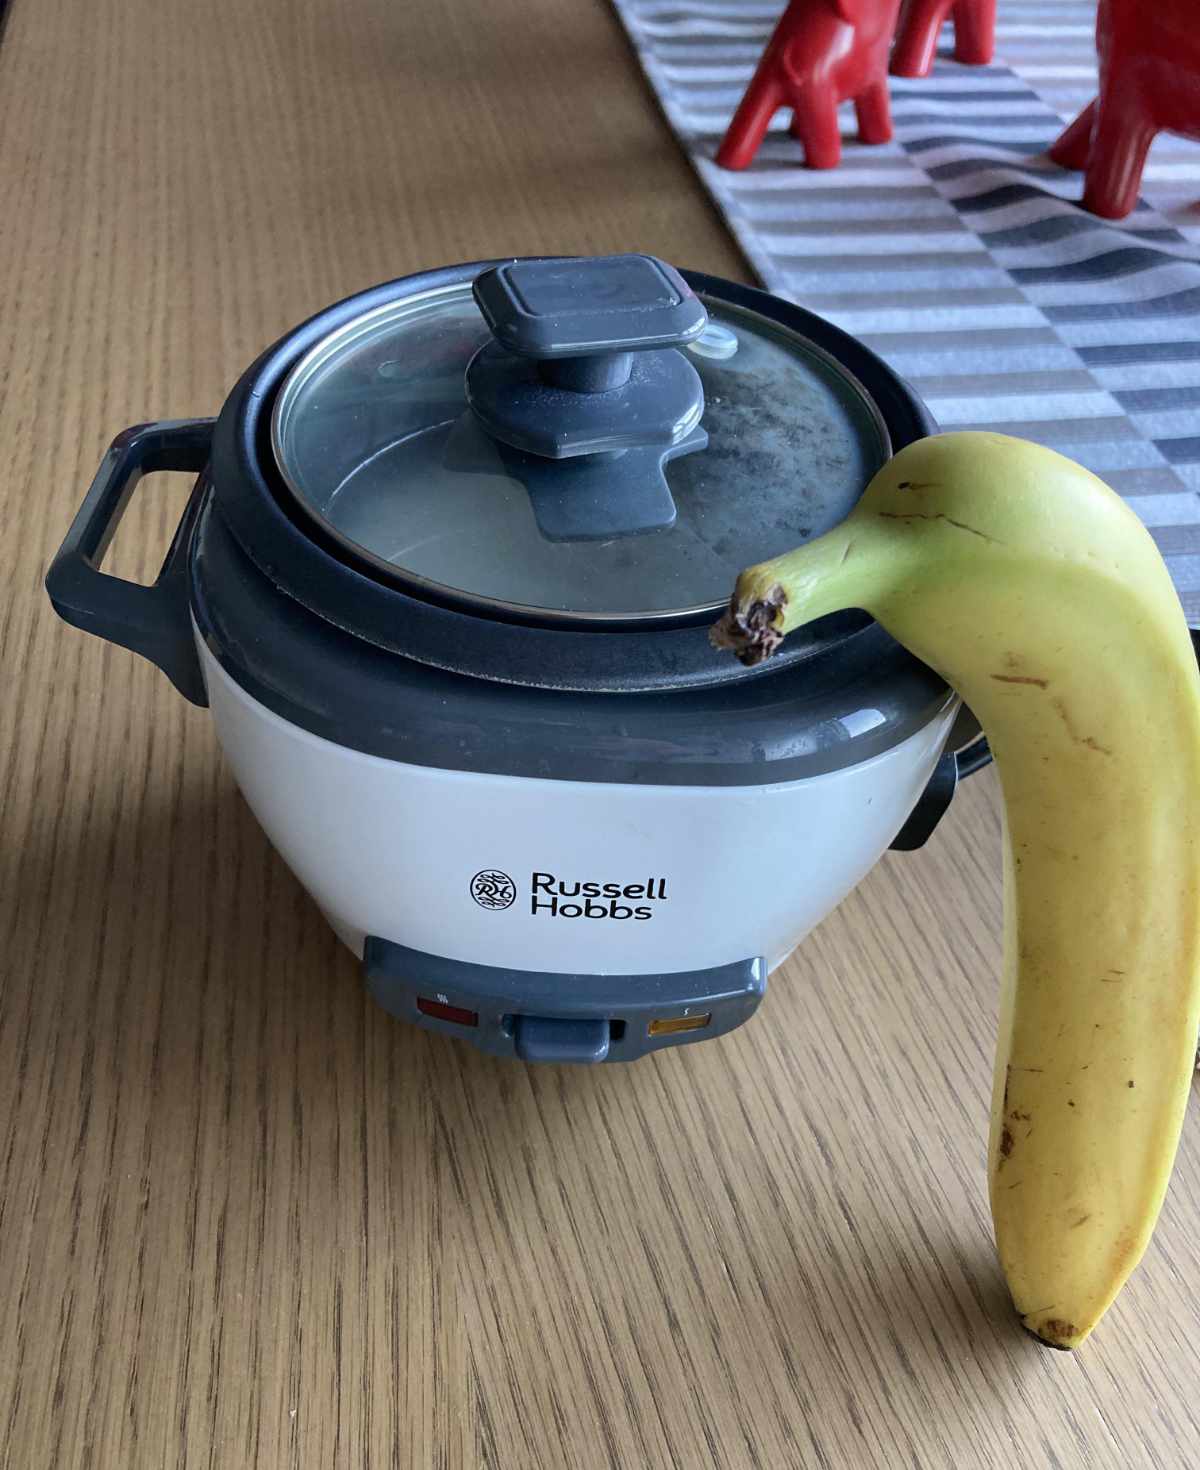 And this is why you check the size of the rice cooker before hitting the Amazon buy button (banana for scale)